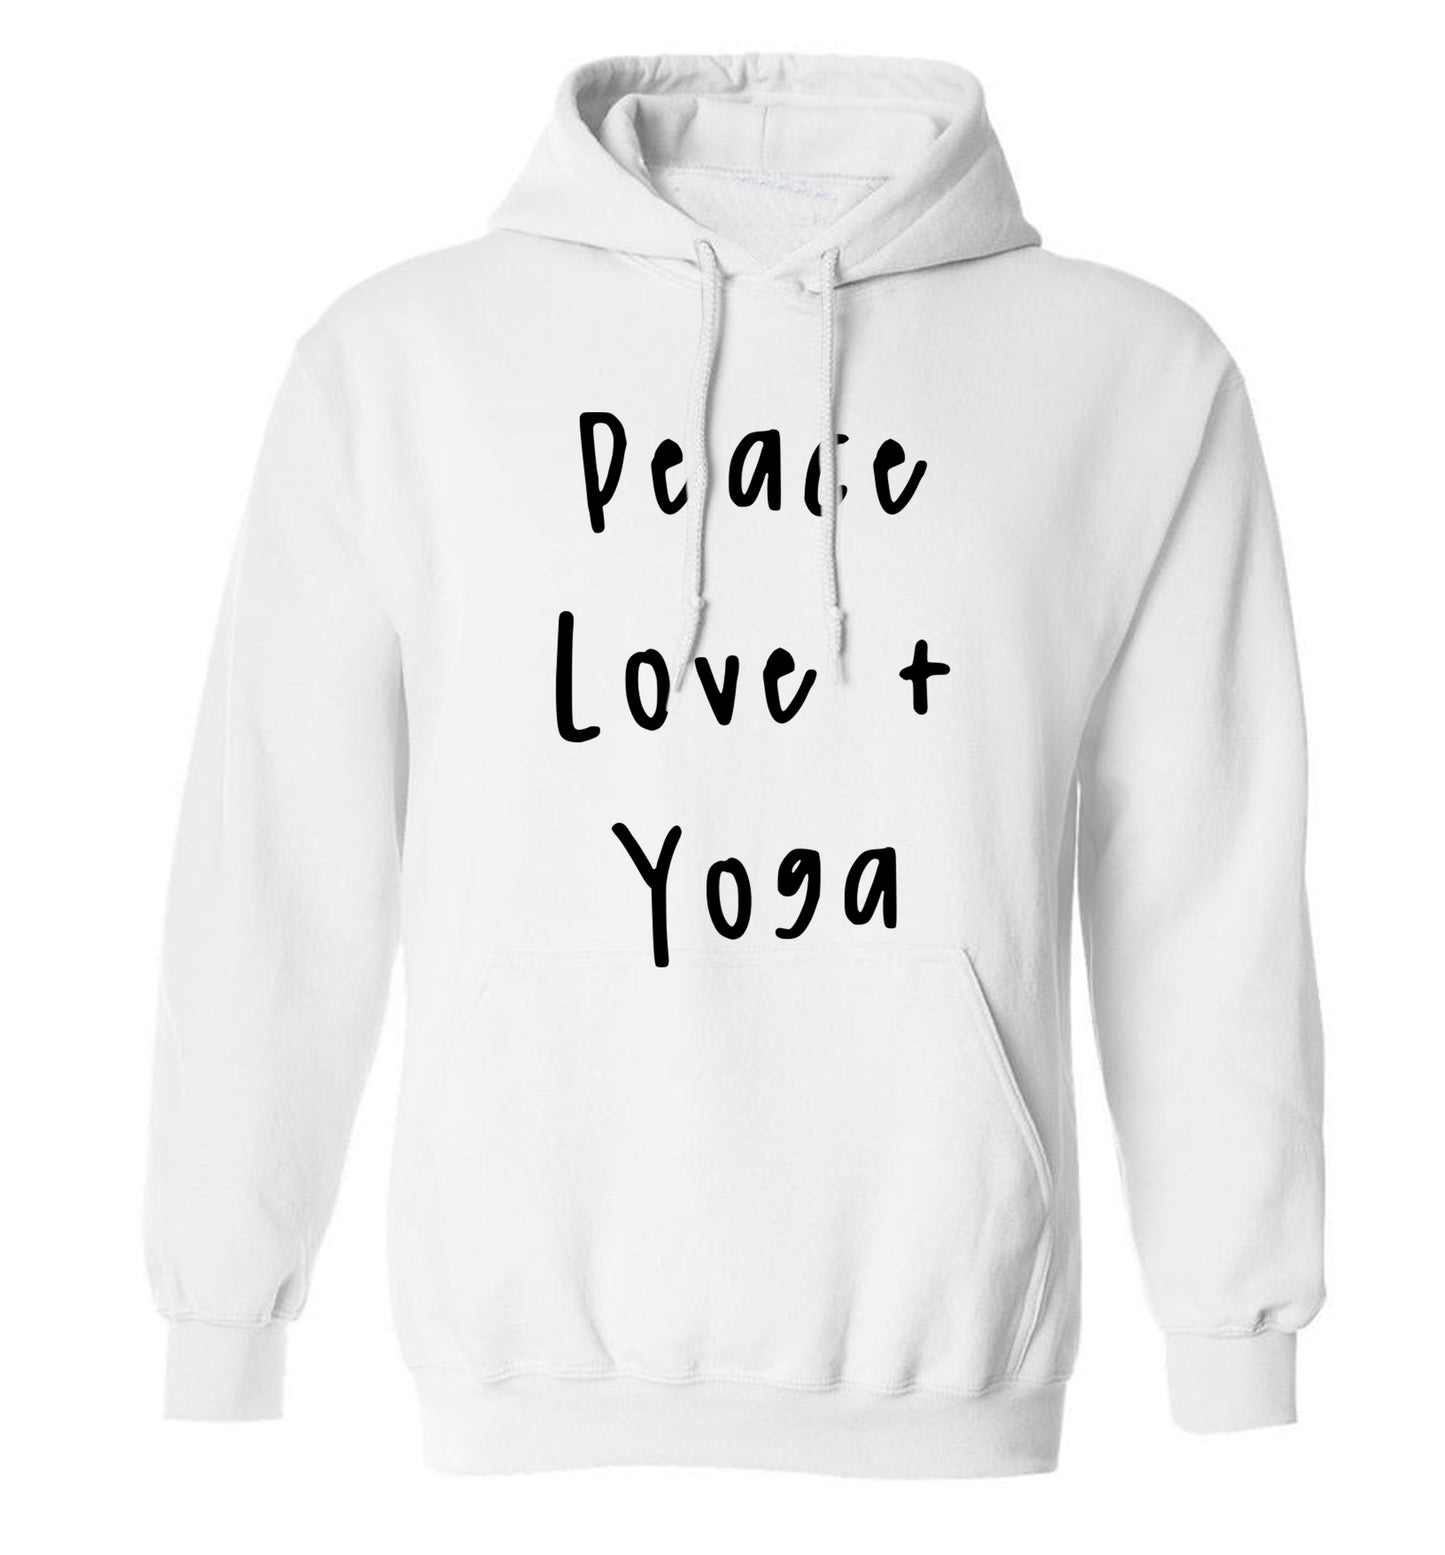 Peace love and yoga adults unisex white hoodie 2XL